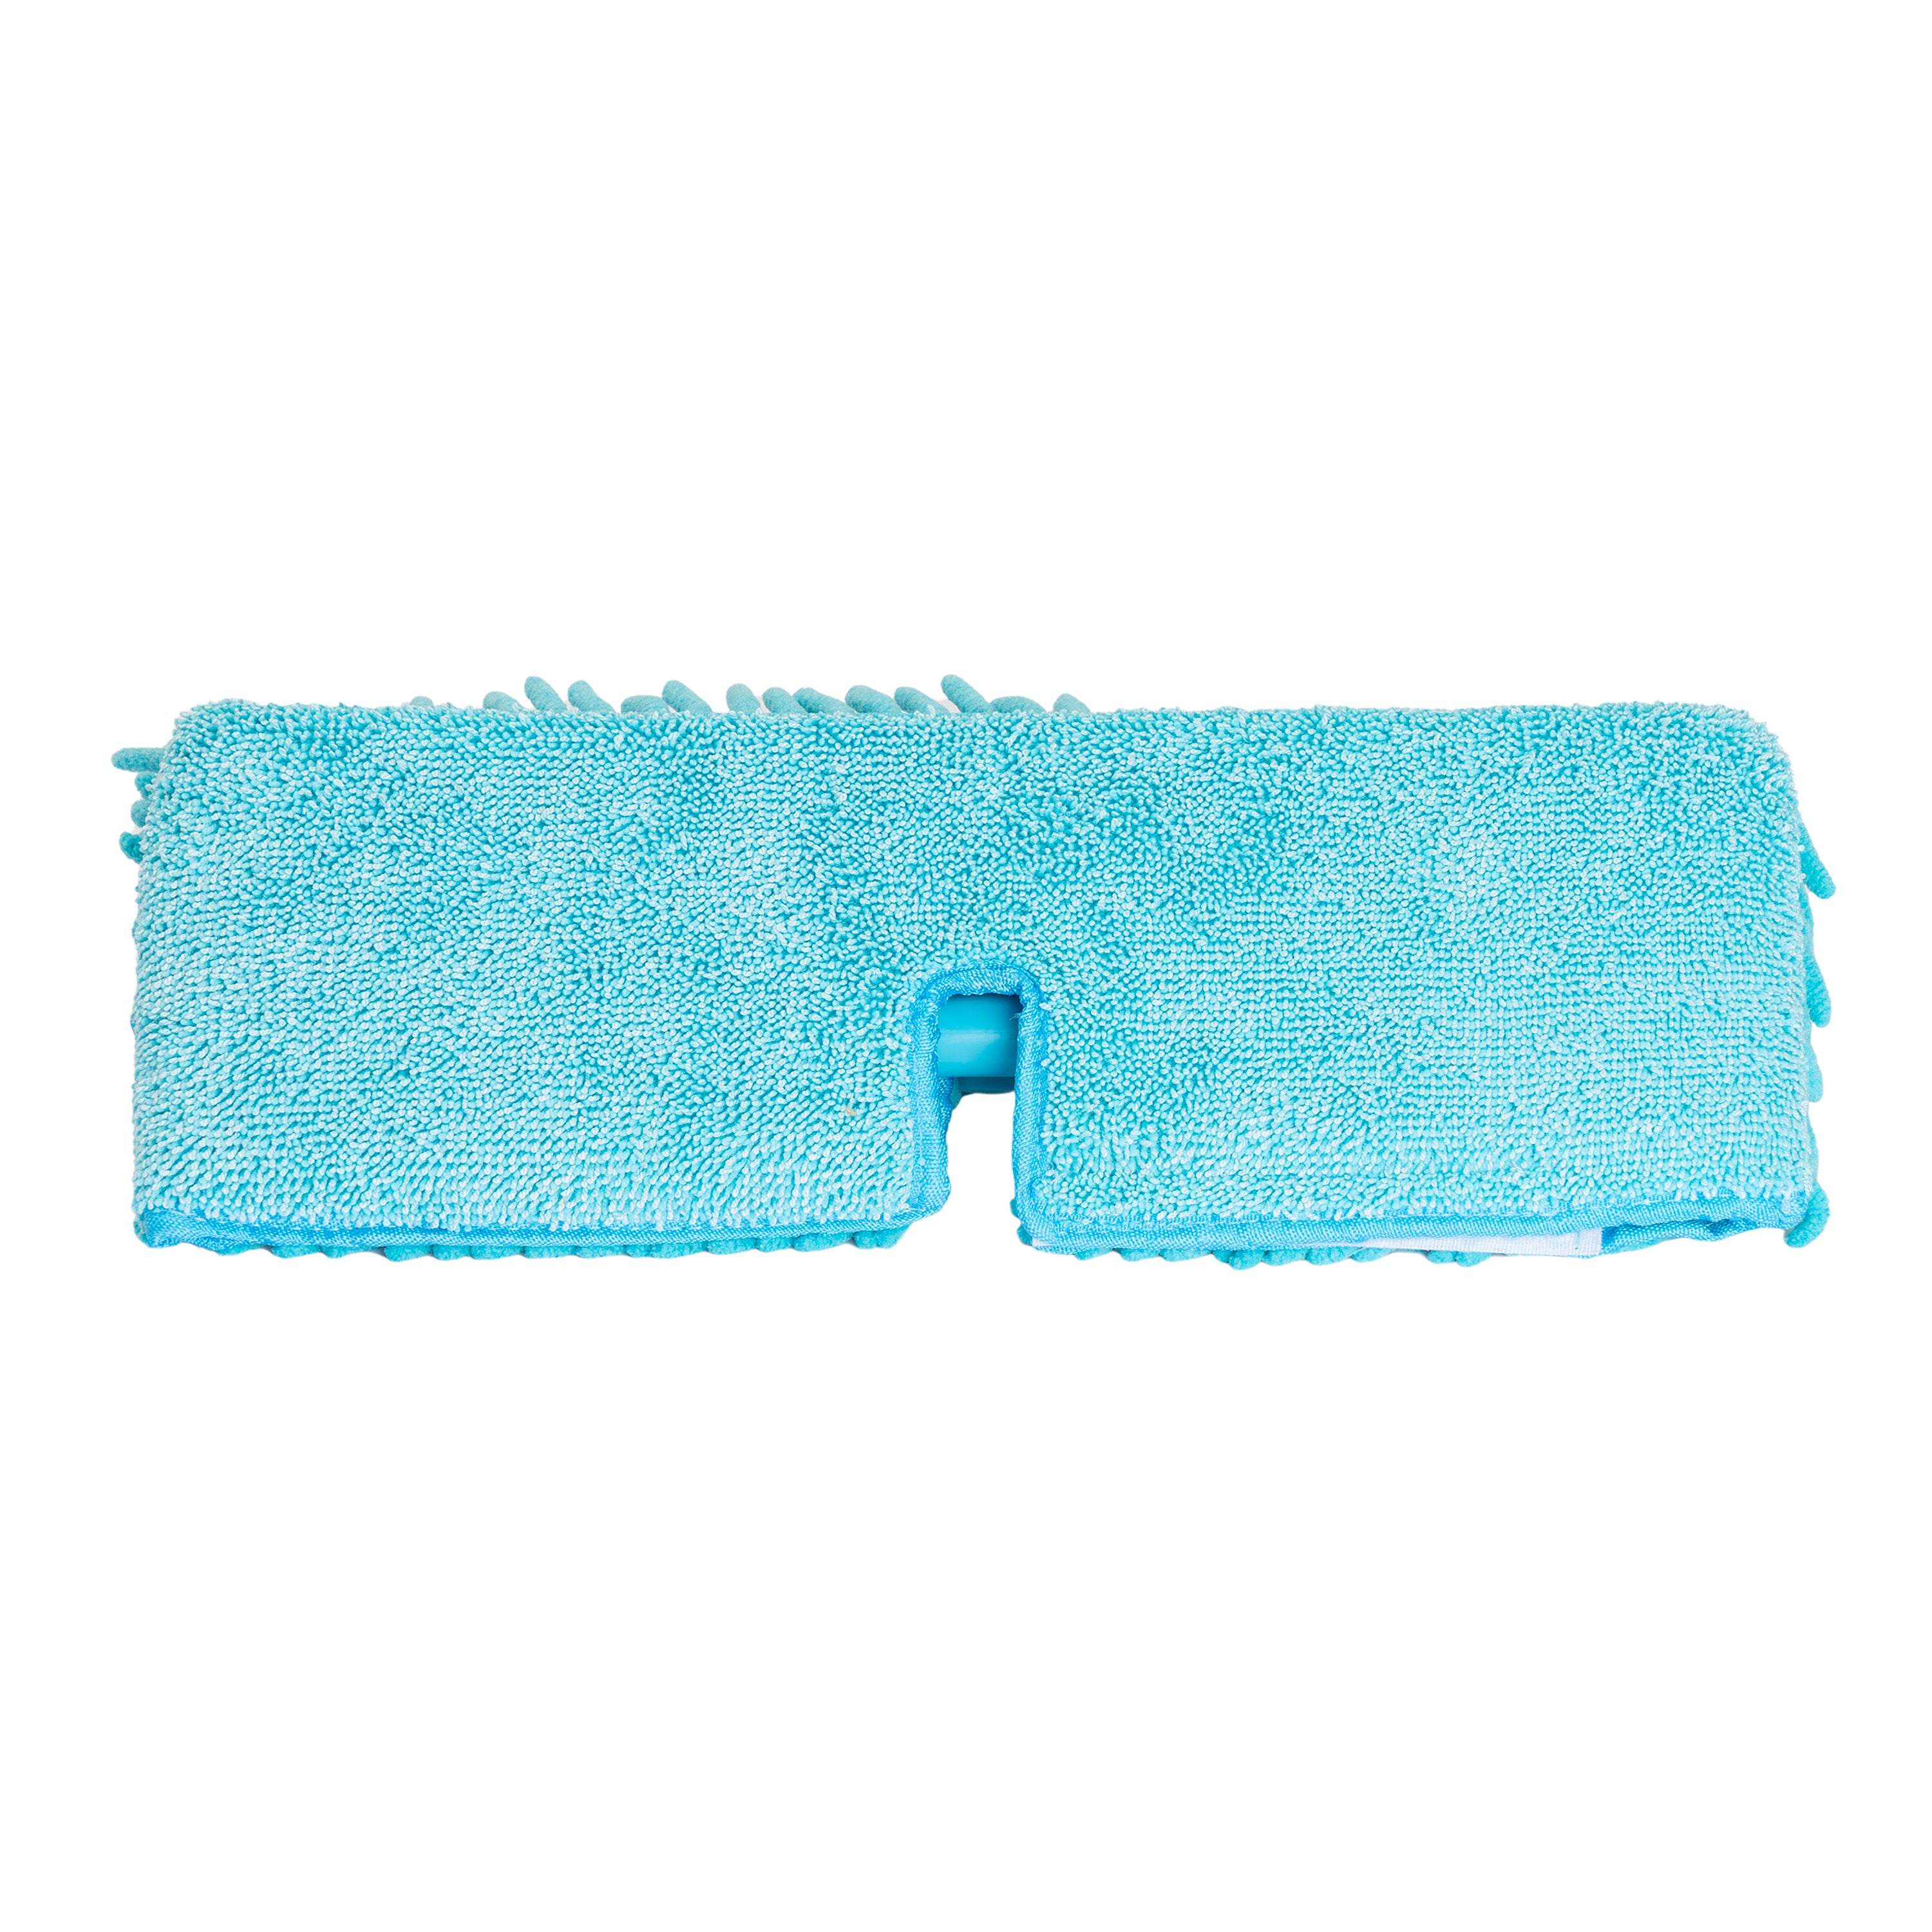 Dynamic Duo Micro Mop Replacement Head & Frame Flip Mop - Teal